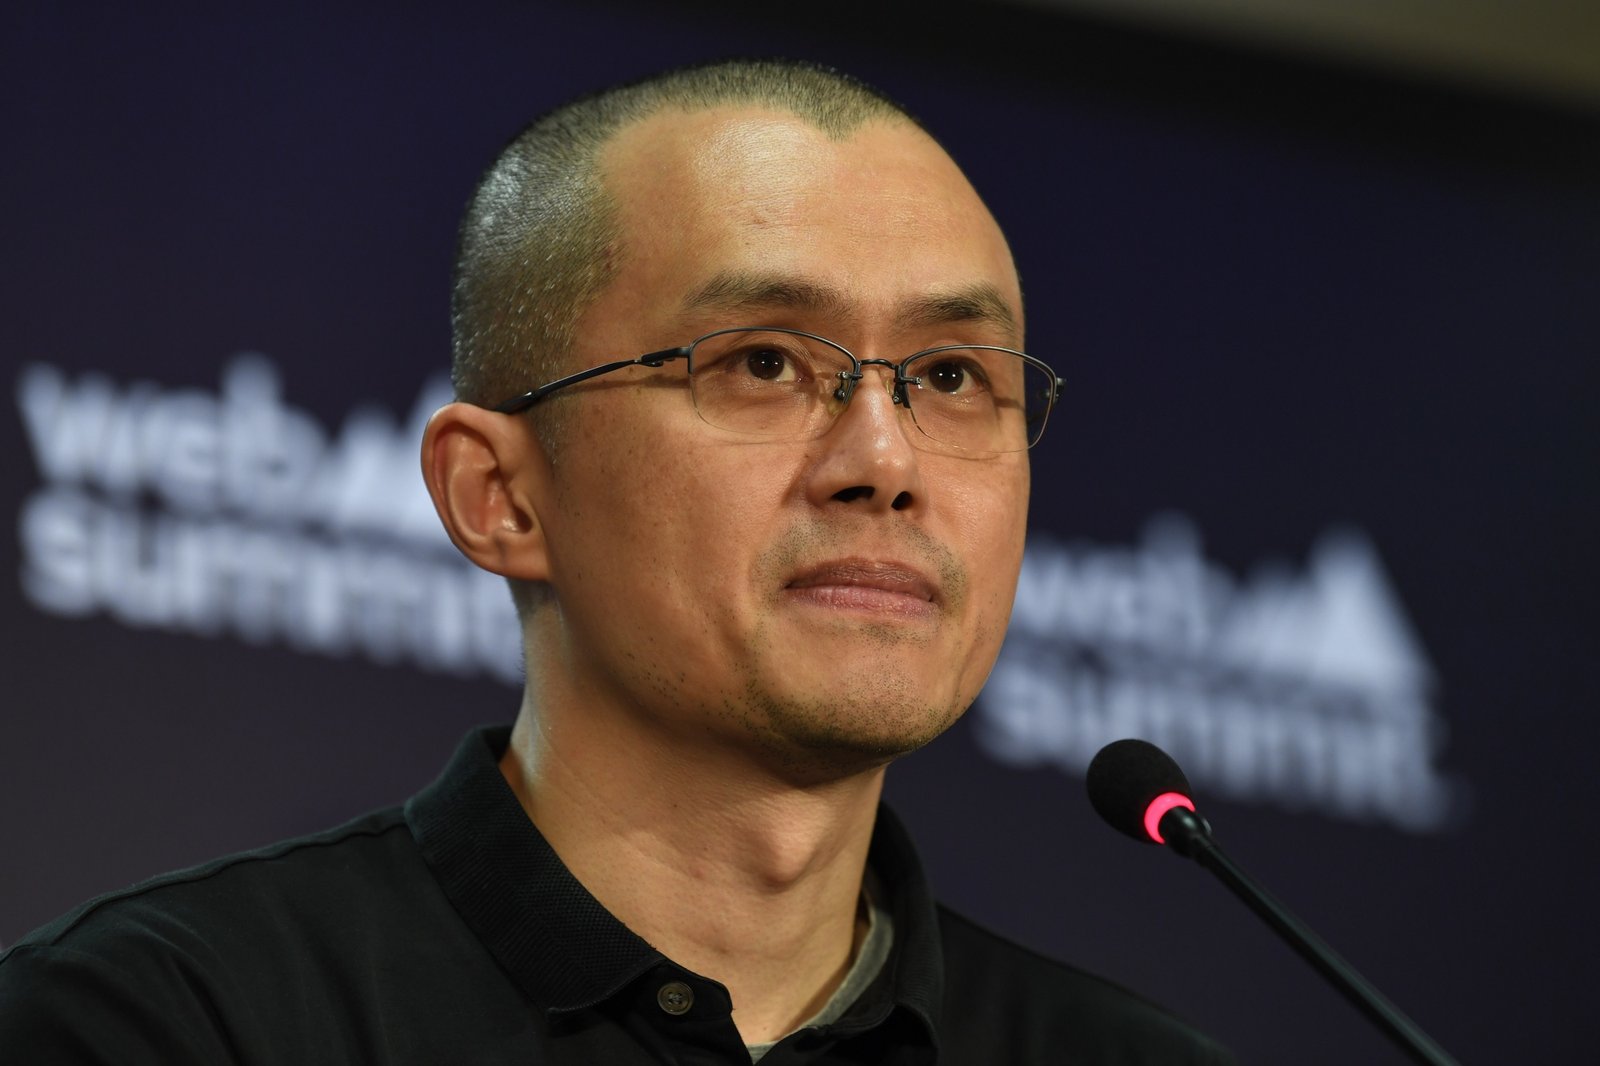 Binance's resolution with US and CZ stepped down as CEO